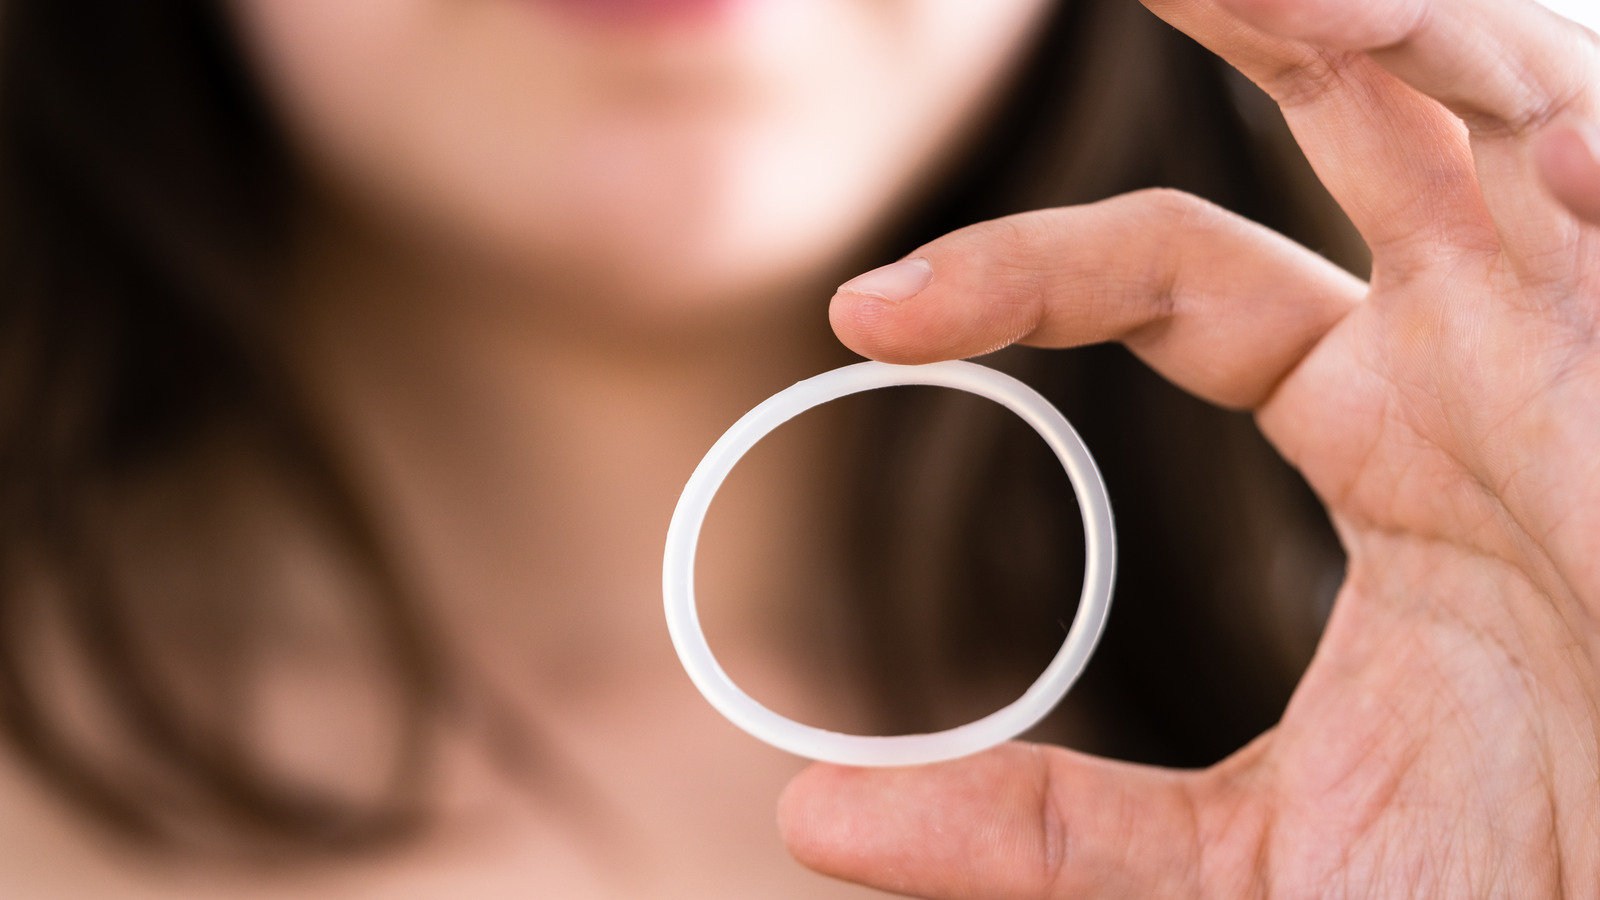 Vaginal Ring For Birth Control: Effectiveness & Side Effects